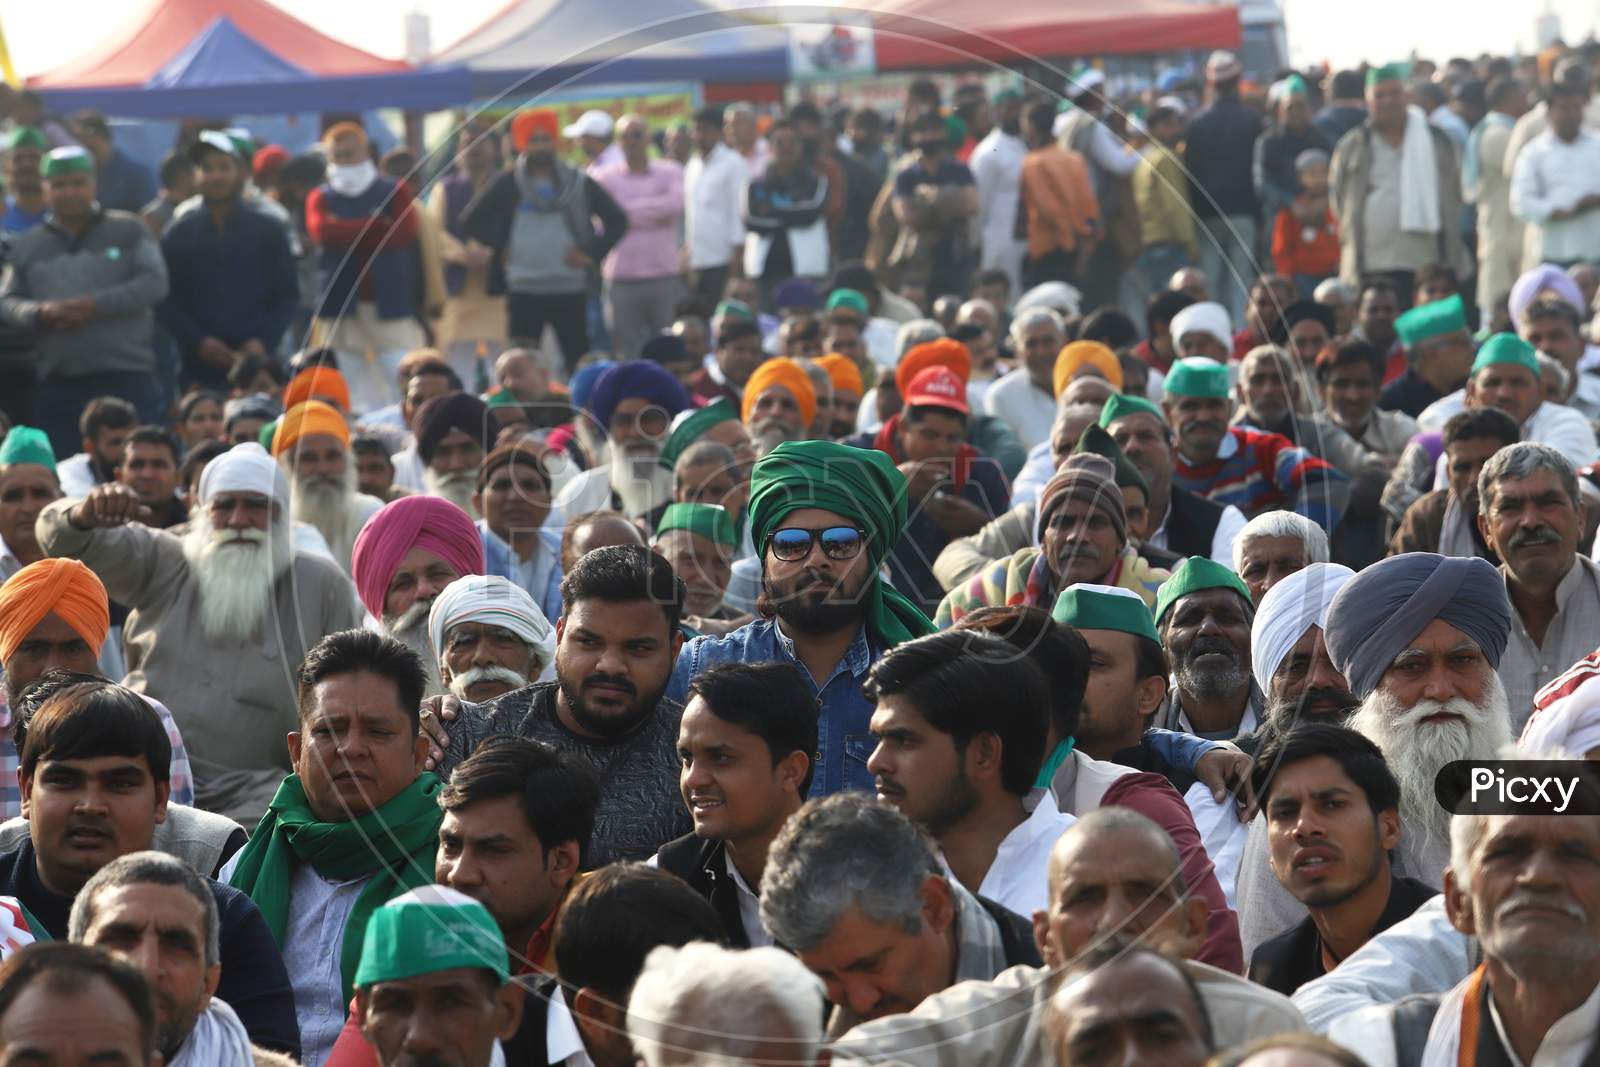 Farmers take part in a protest against the central government's recent agricultural reforms at Delhi-Uttar Pradesh state border in Ghaziabad on February 2, 2021